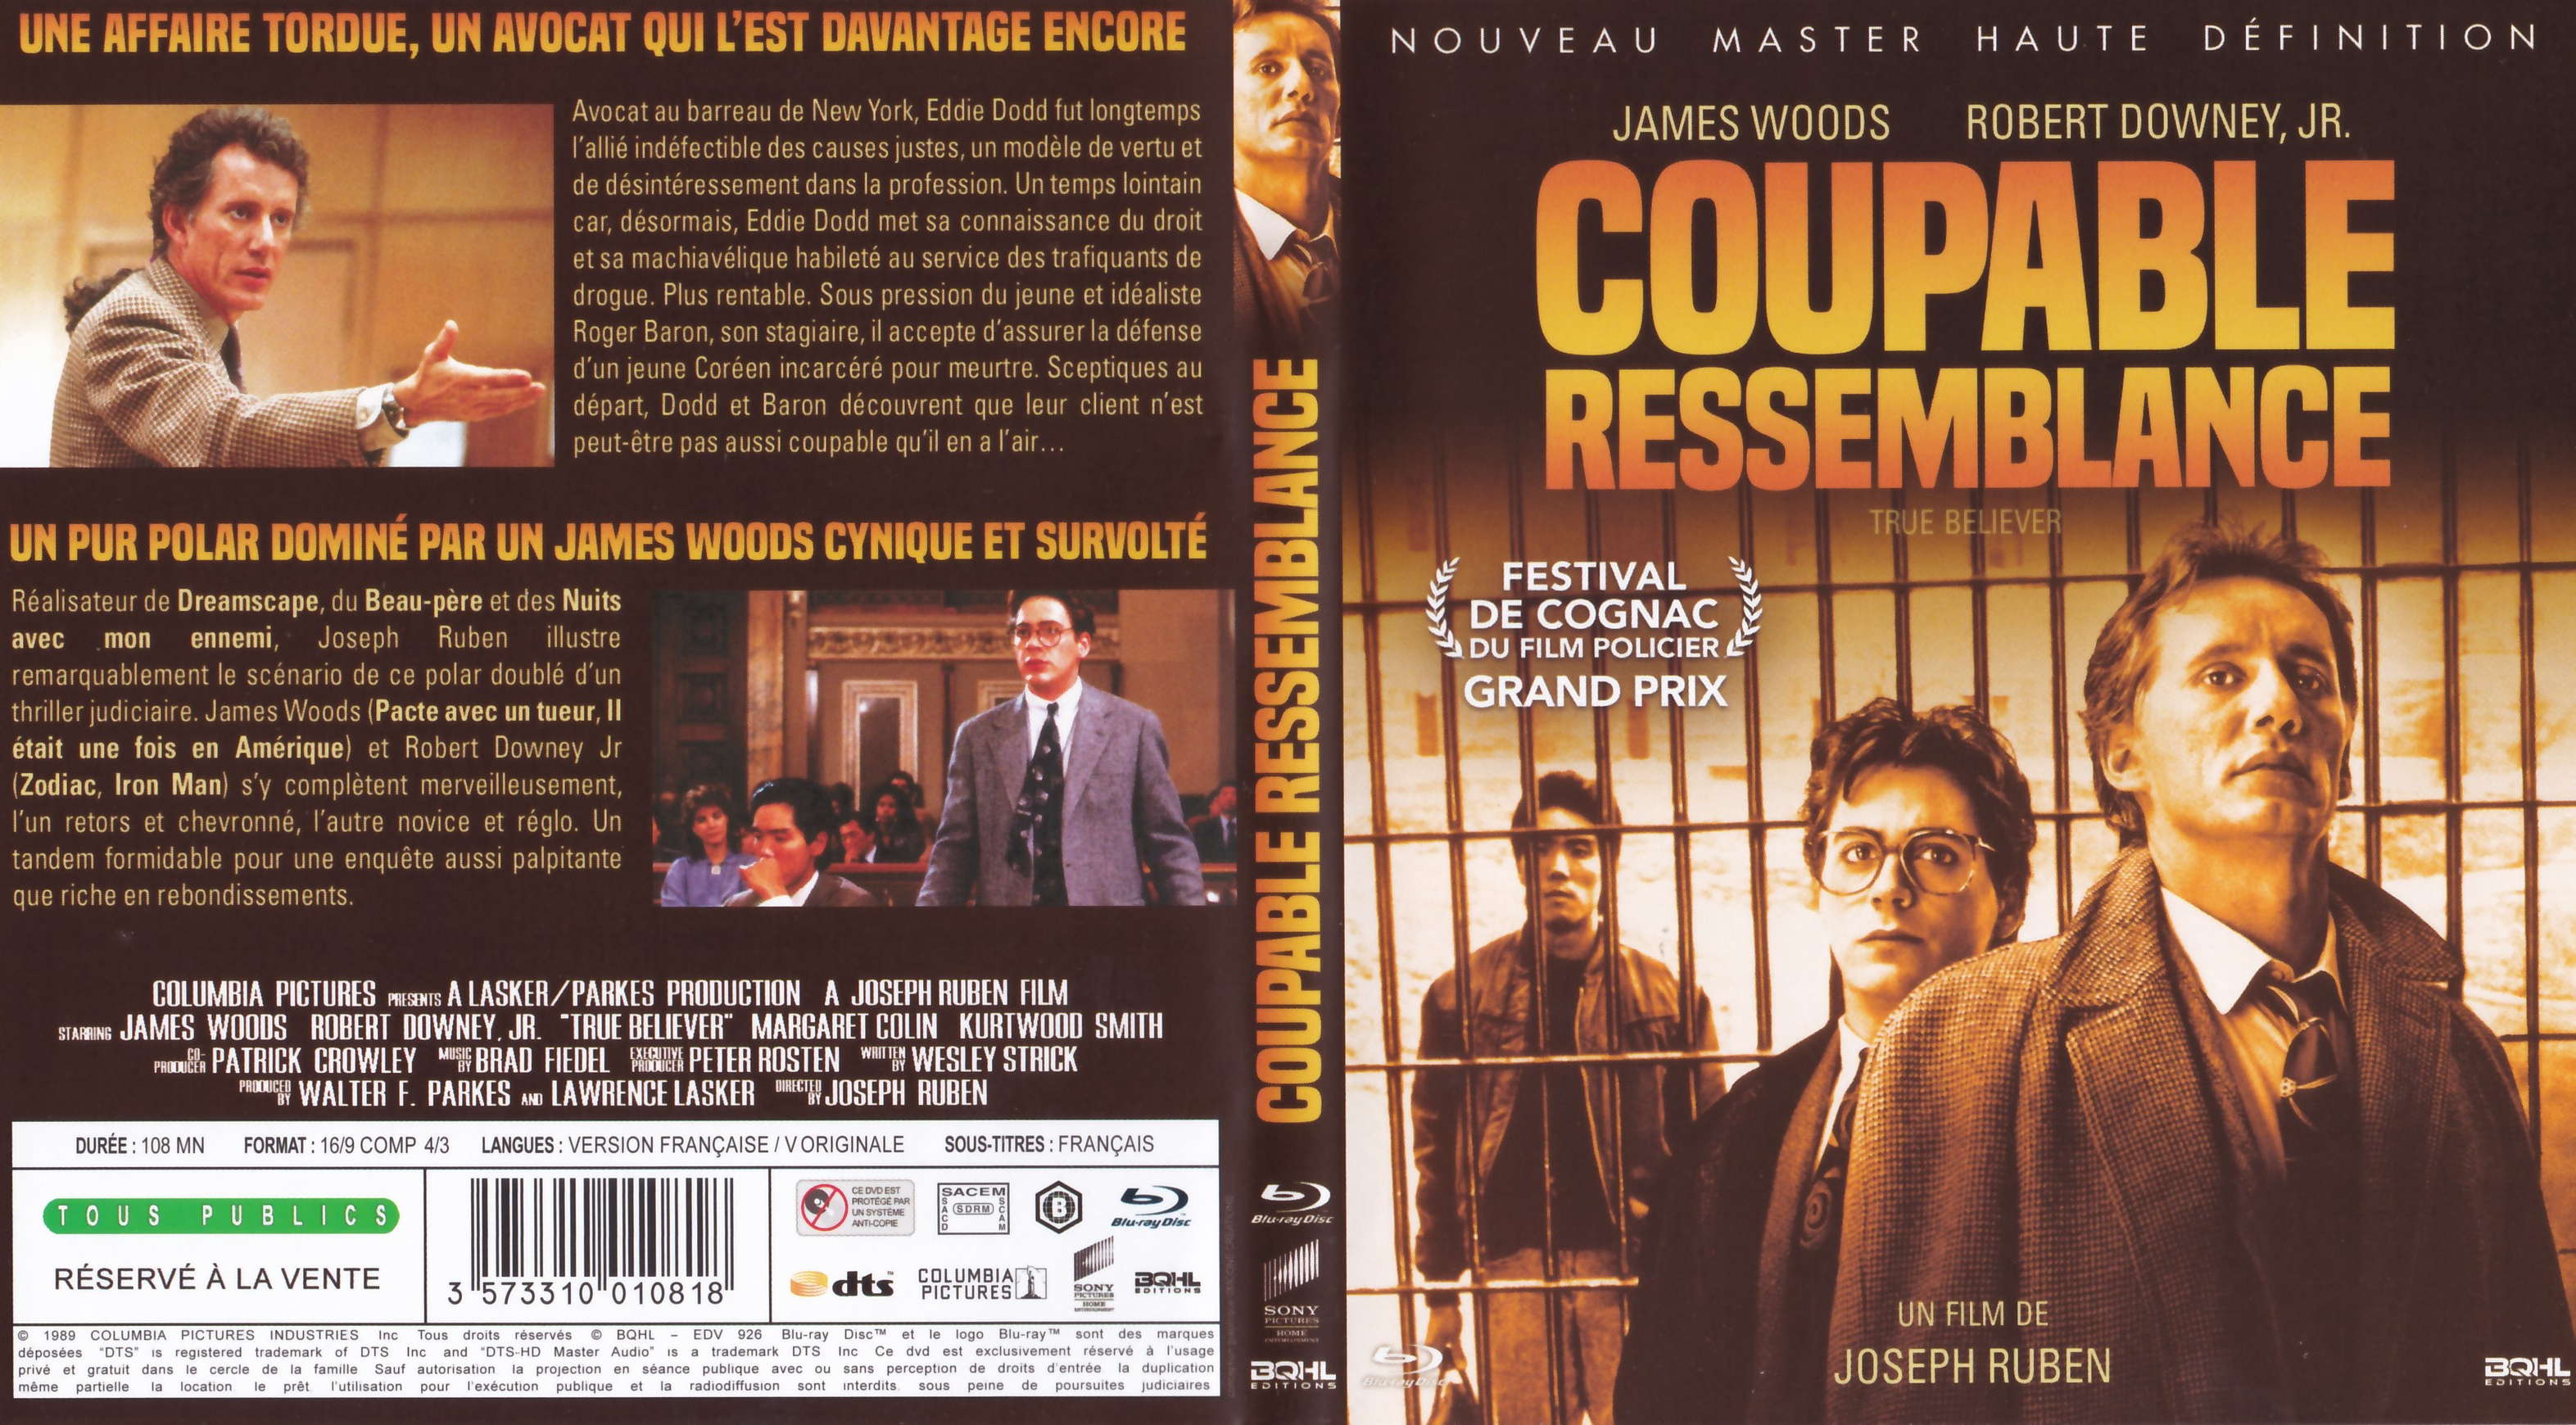 Jaquette DVD Coupable ressemblance (BLU-RAY)